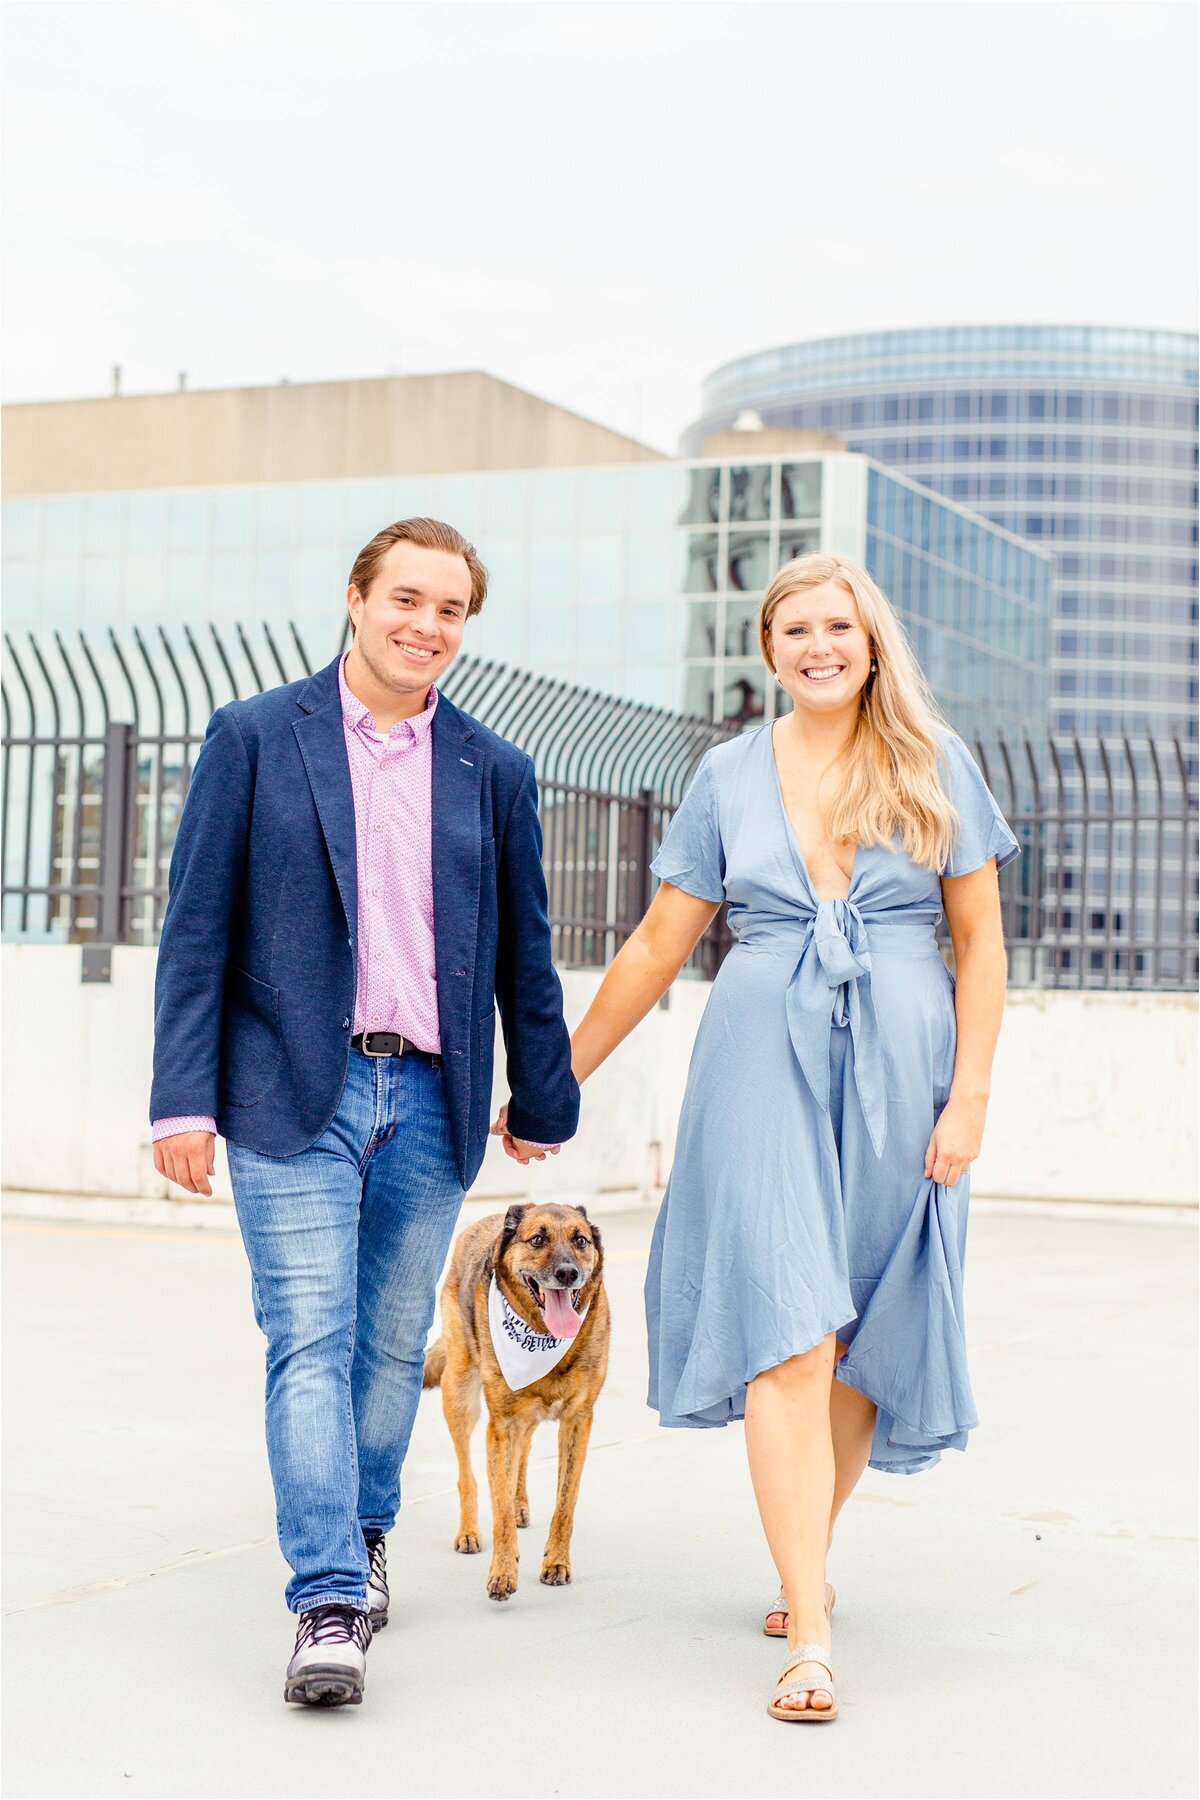 downtown-grand-rapids-michigan-engagement-photo-with-dog